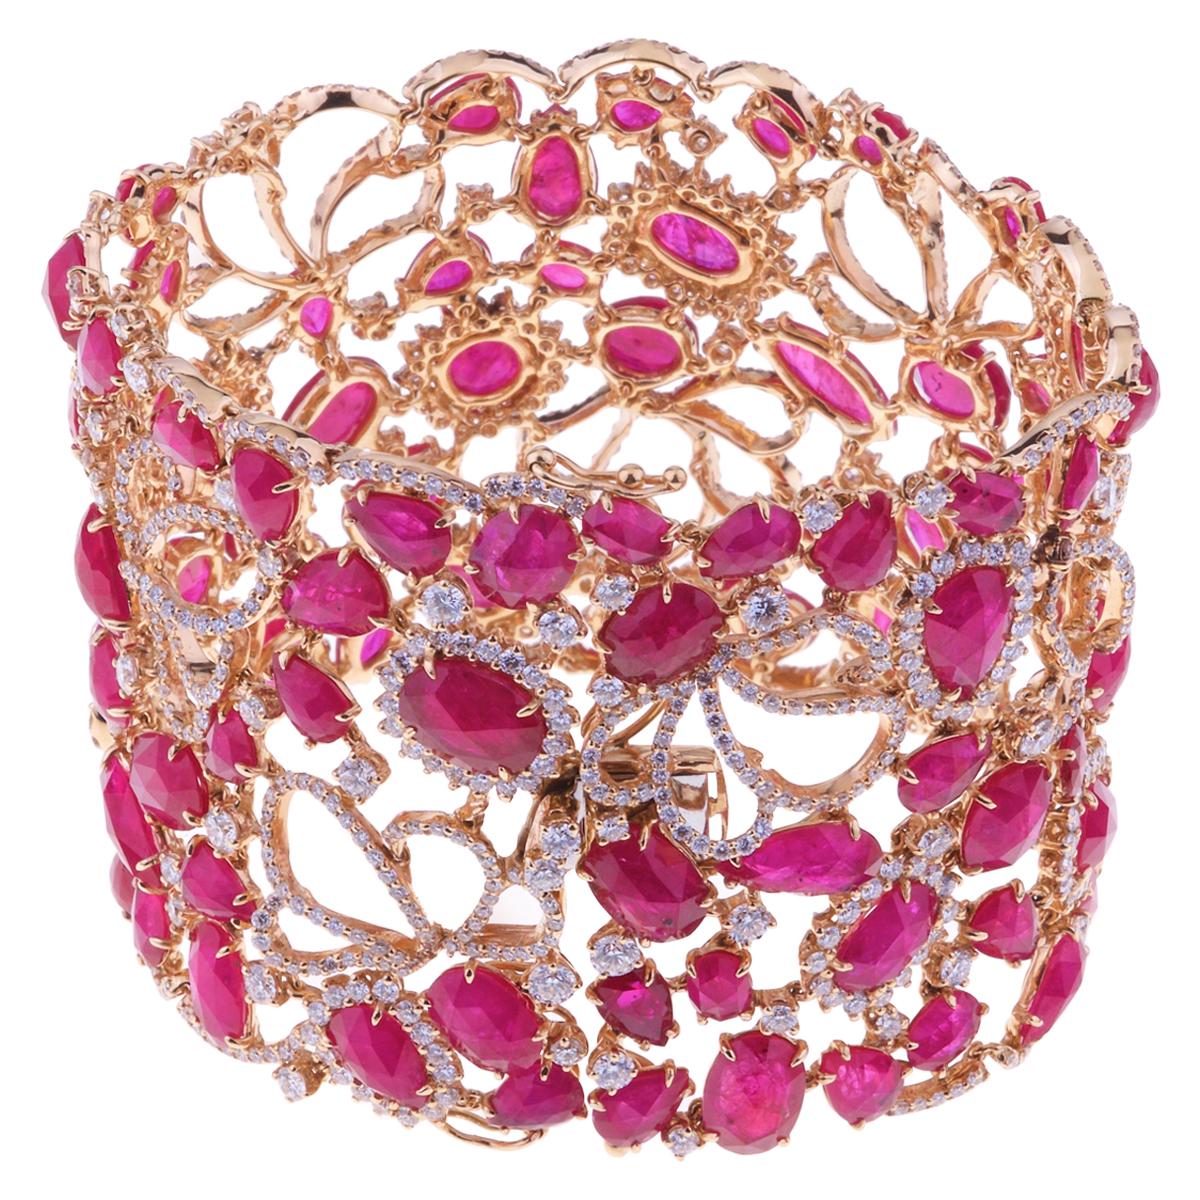 Stunning Band Bracelet with Ruby and Diamonds in a Flowers Design For Sale